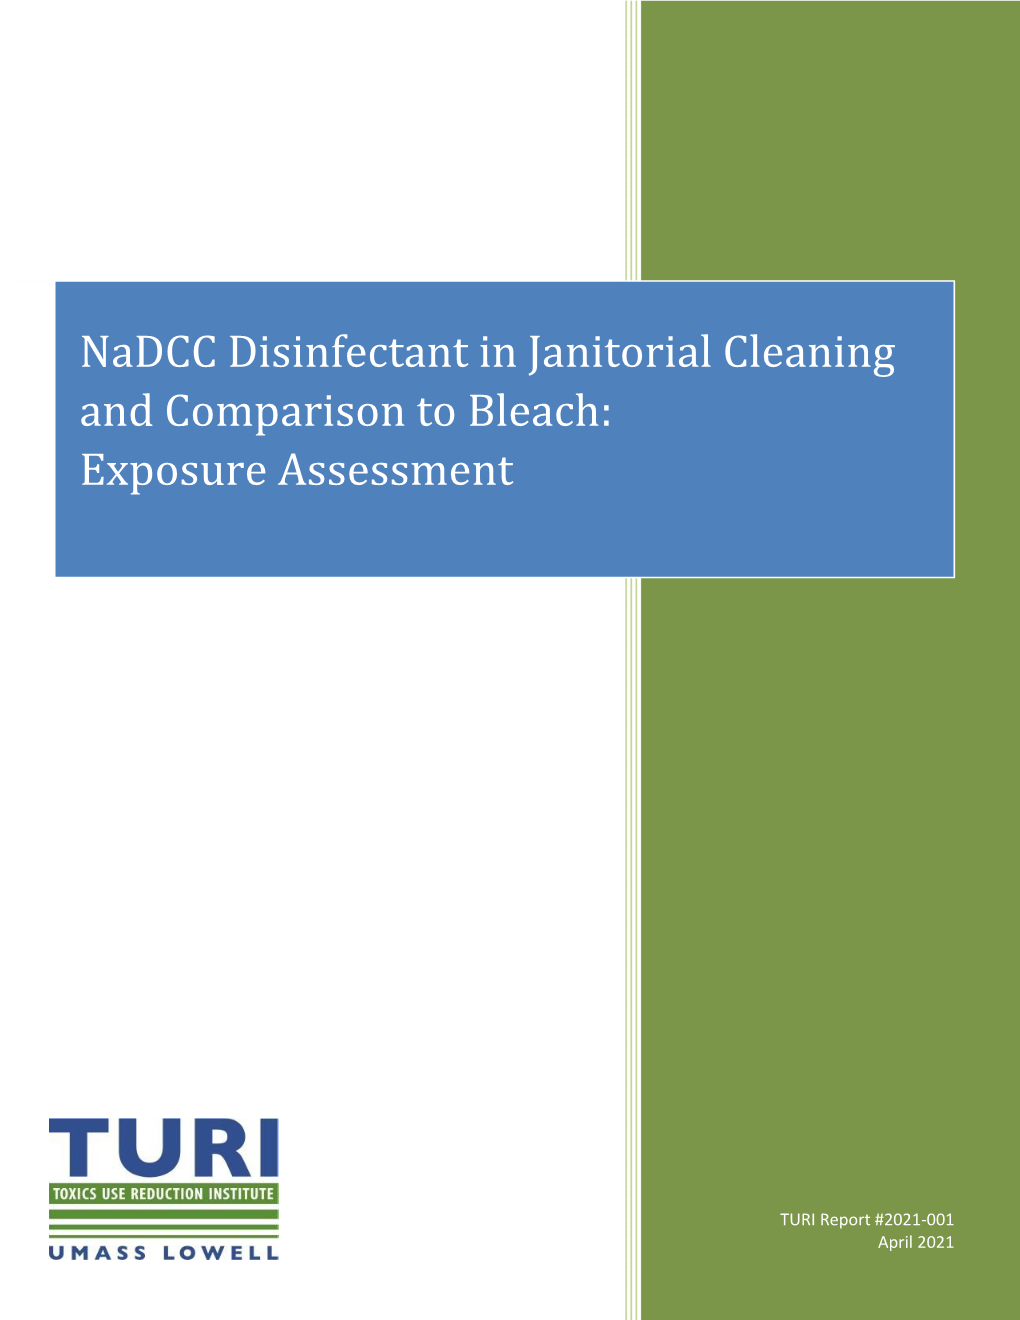 Nadcc Disinfectant in Janitorial Cleaning and Comparison to Bleach: Exposure Assessment